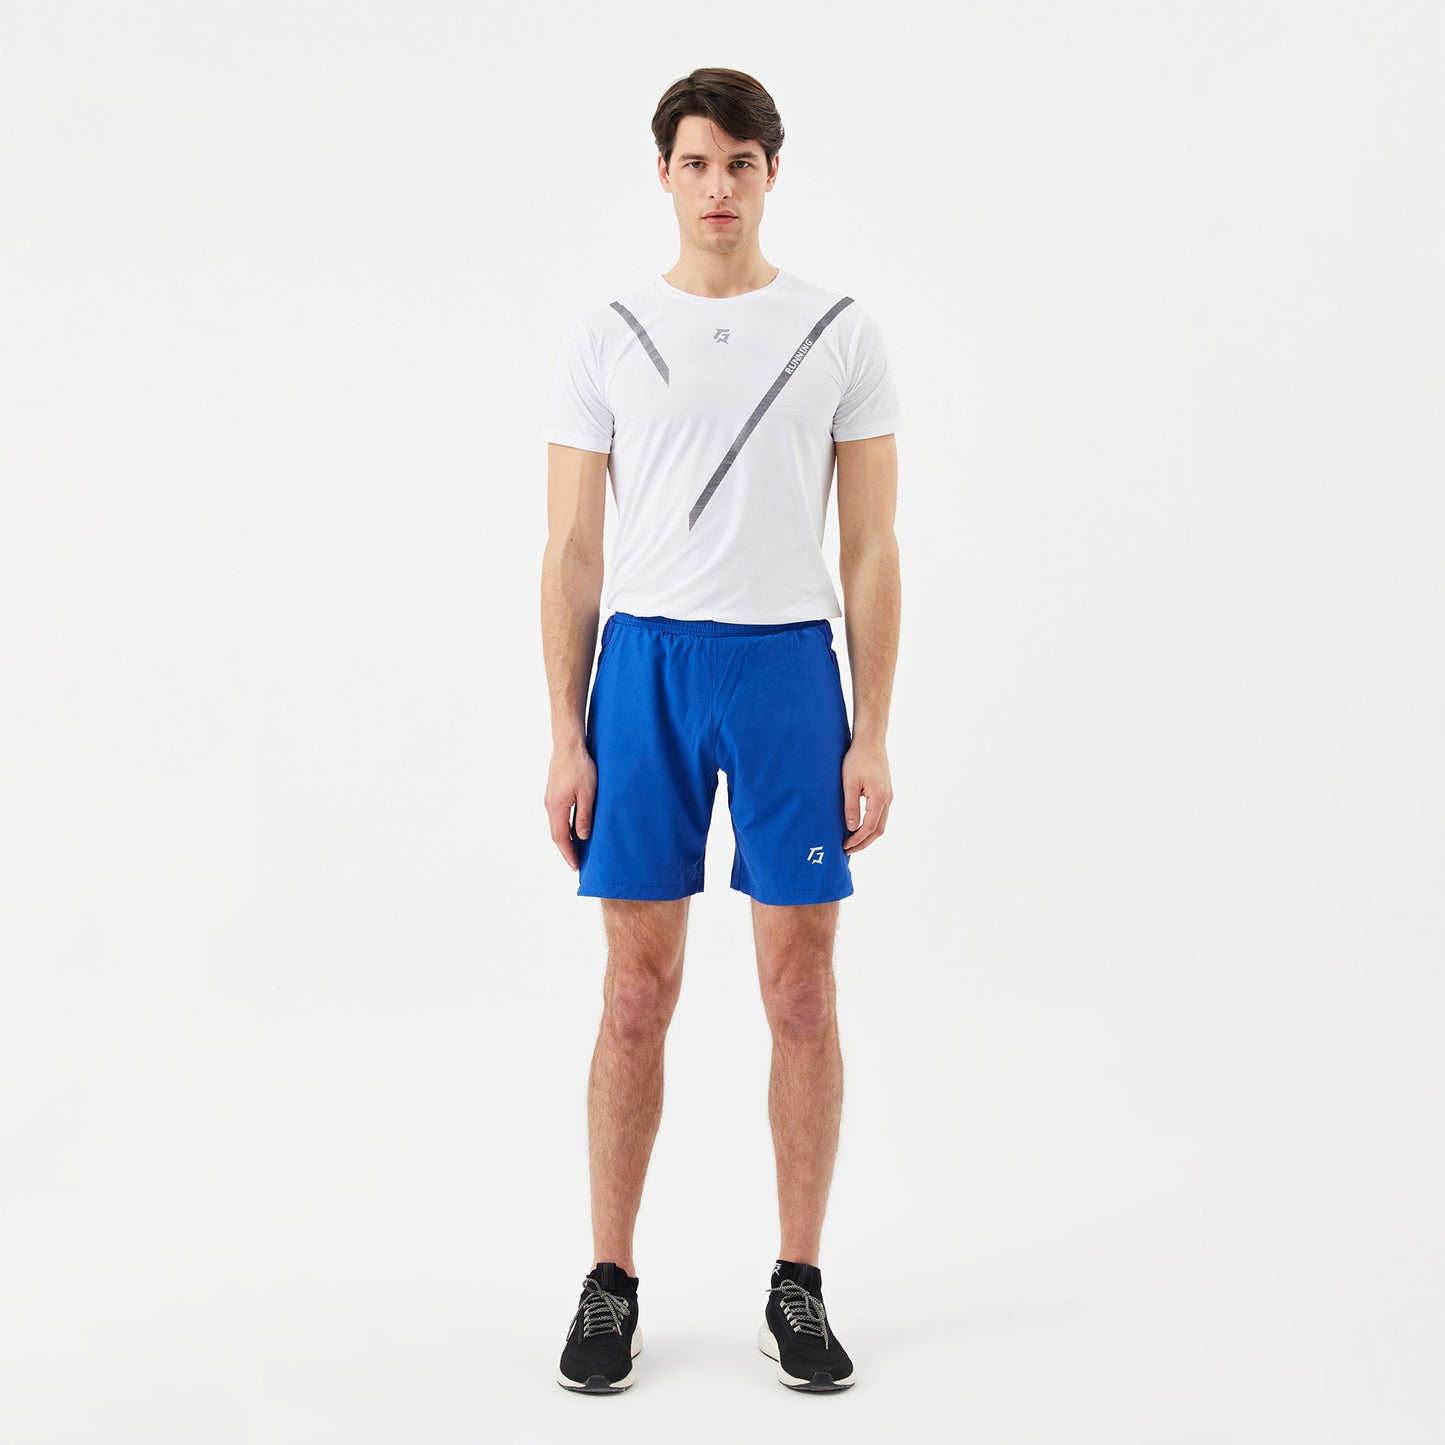 Undisputed Shorts (Royal Blue)